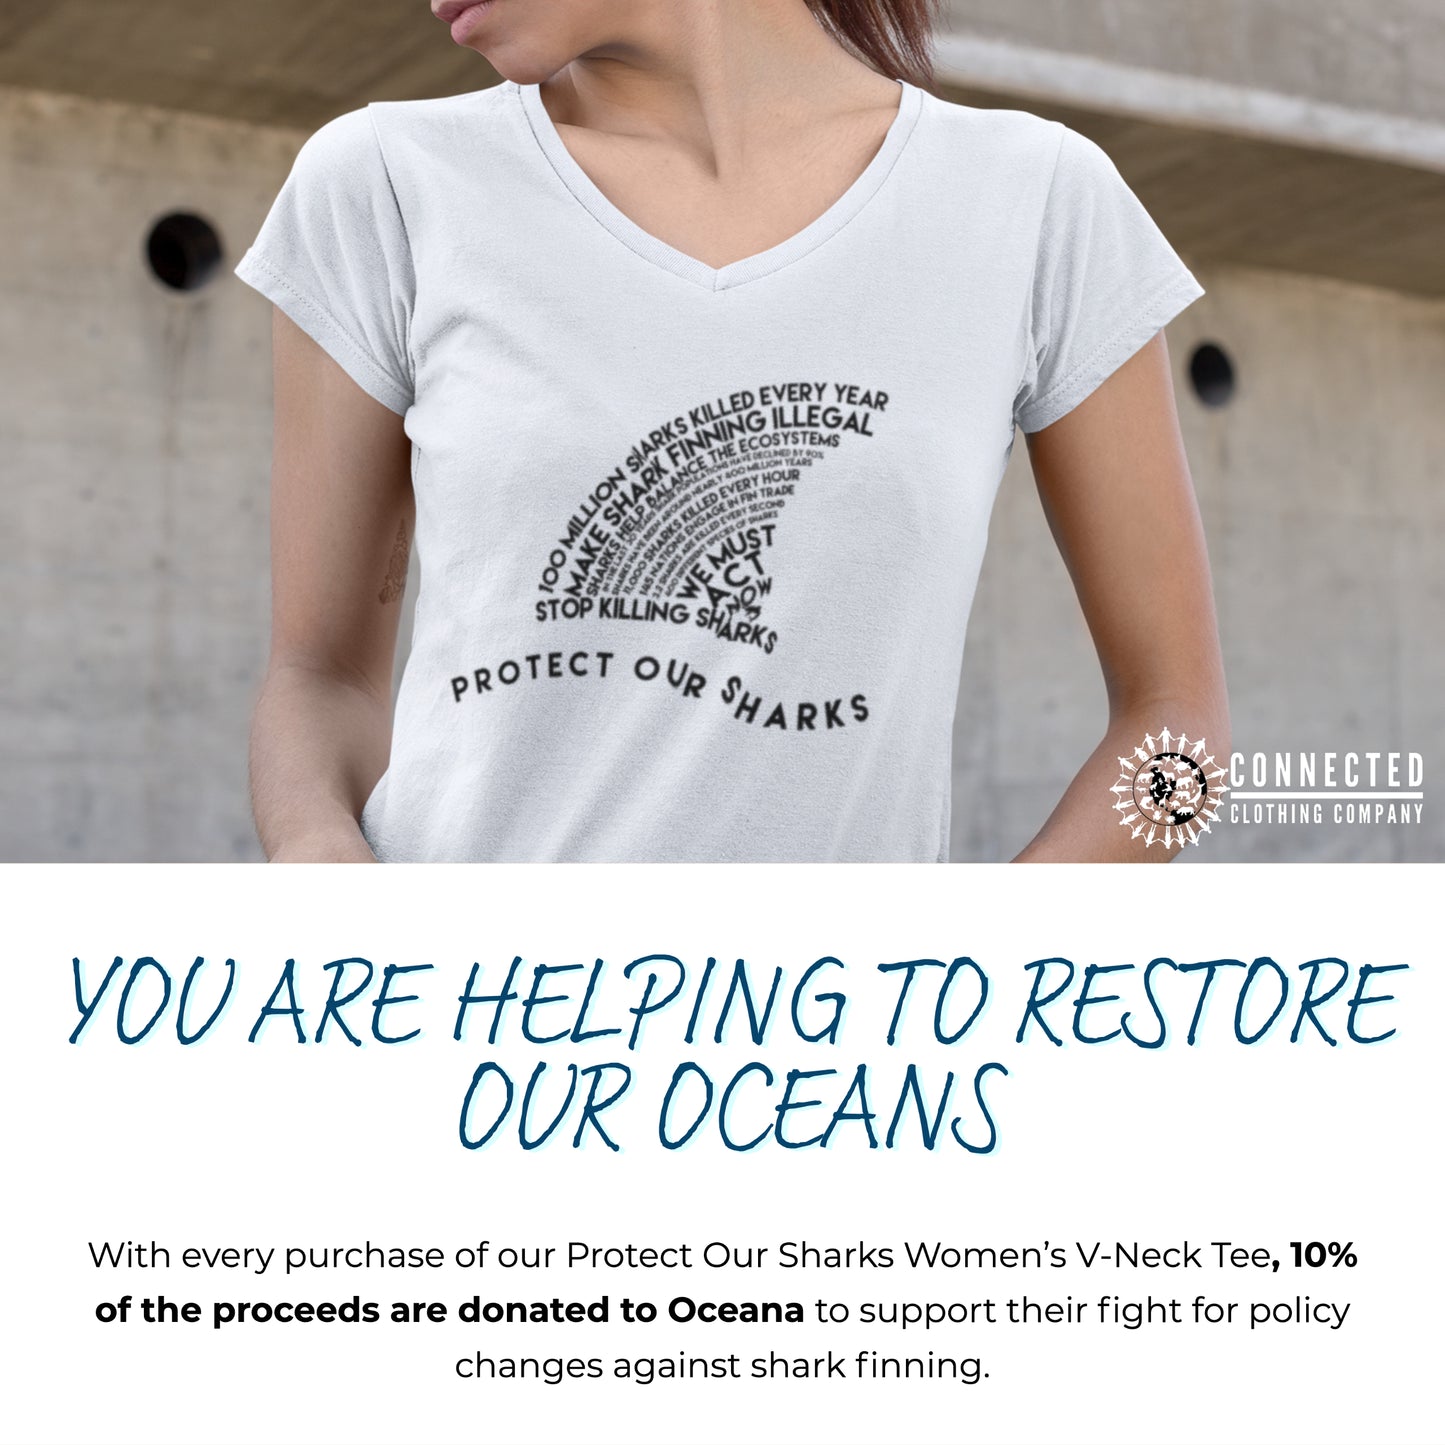 Protect Our Sharks Women's V-Neck Tee